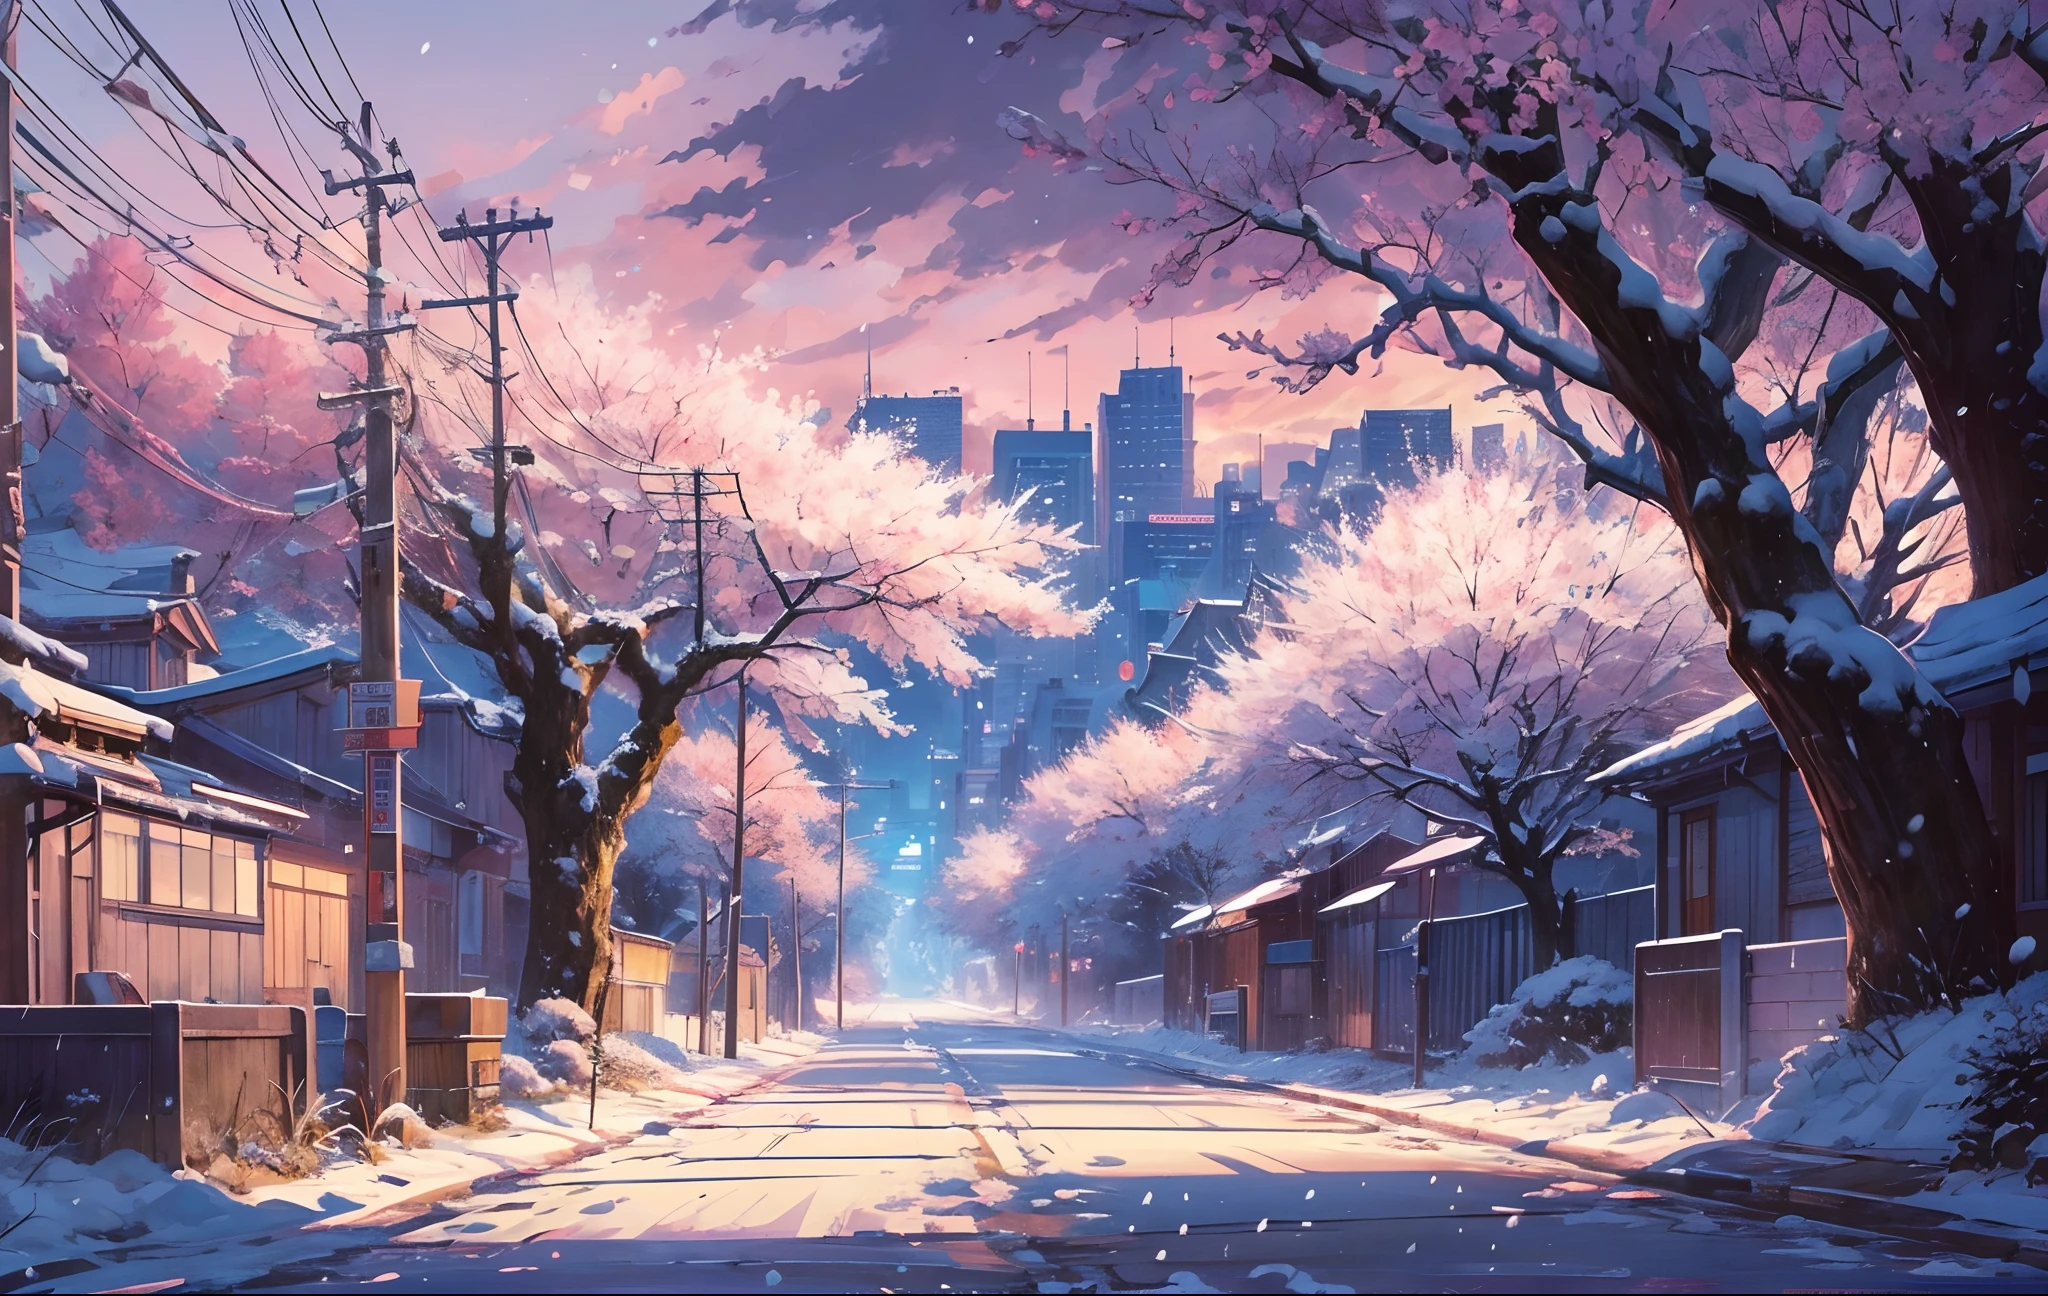 masterpiece, concept art, wide shot, panoramic, a street at night with a bridge in the distance, (winter), snowy, a detailed matte painting, by Makoto Shinkai, widescreen shot, driveway, sakura trees-lined path, miyazaki's animated film, endless night, sakura trees along street, art for the film in color, detailed digital anime art, (epic composition, epic proportion), HD